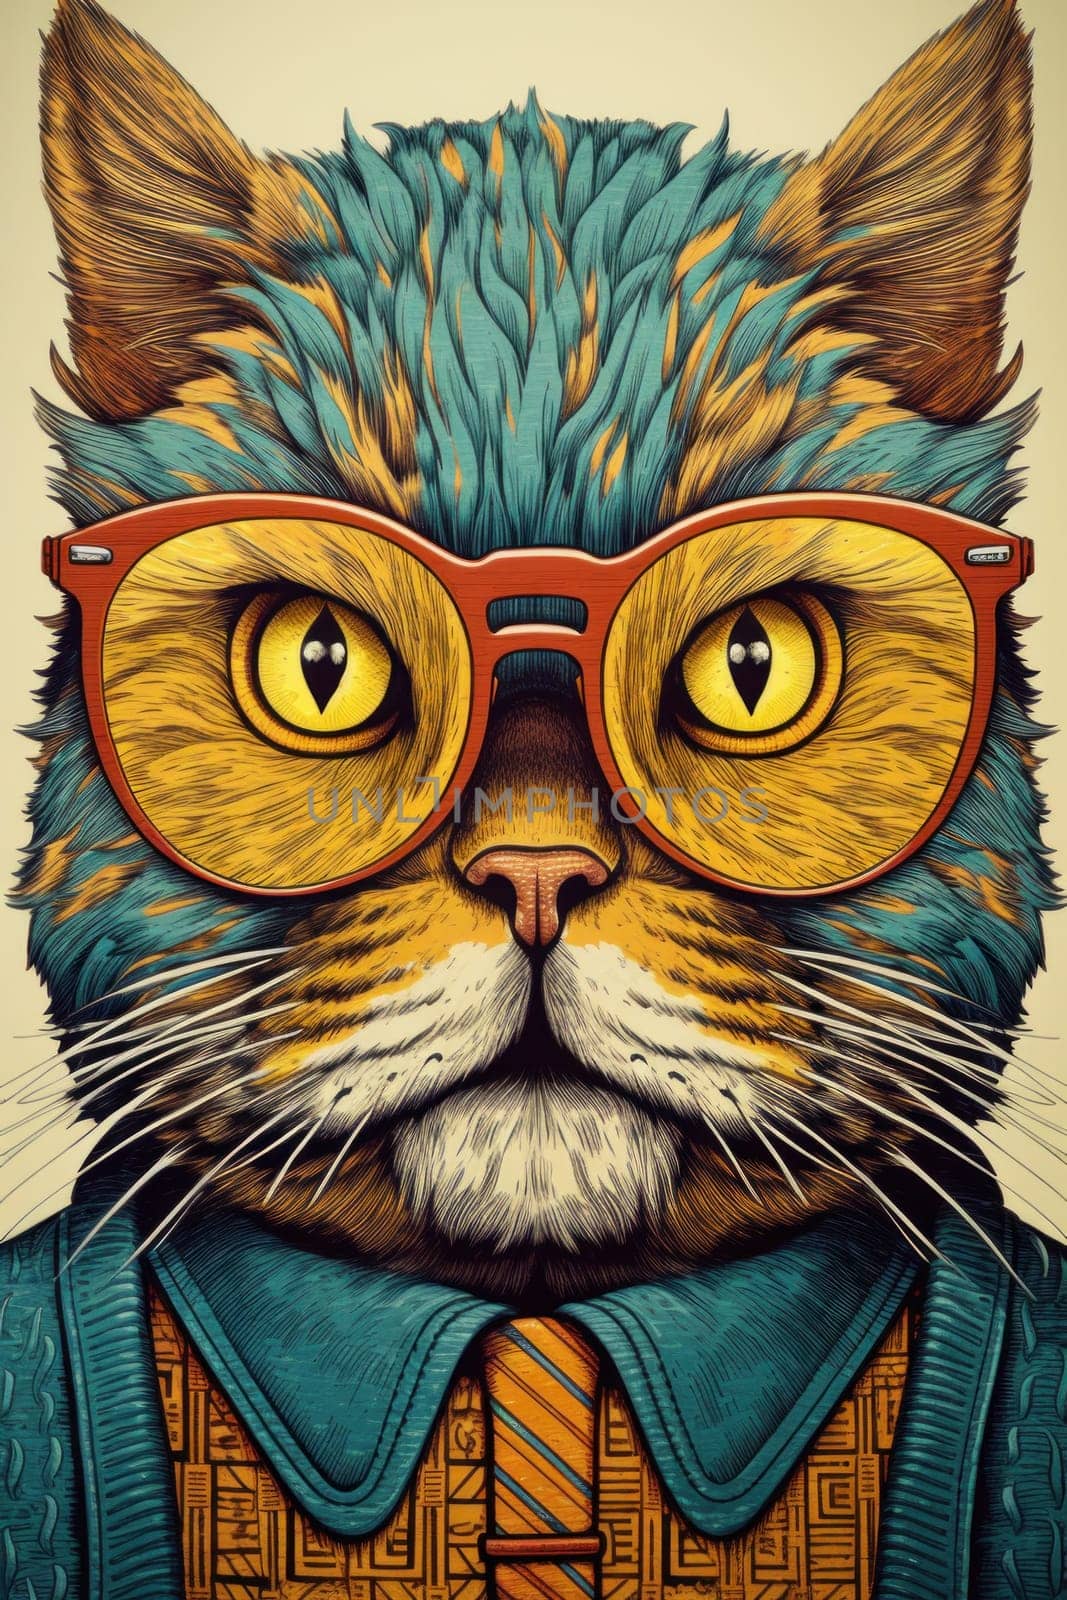 A cat wearing glasses and a tie